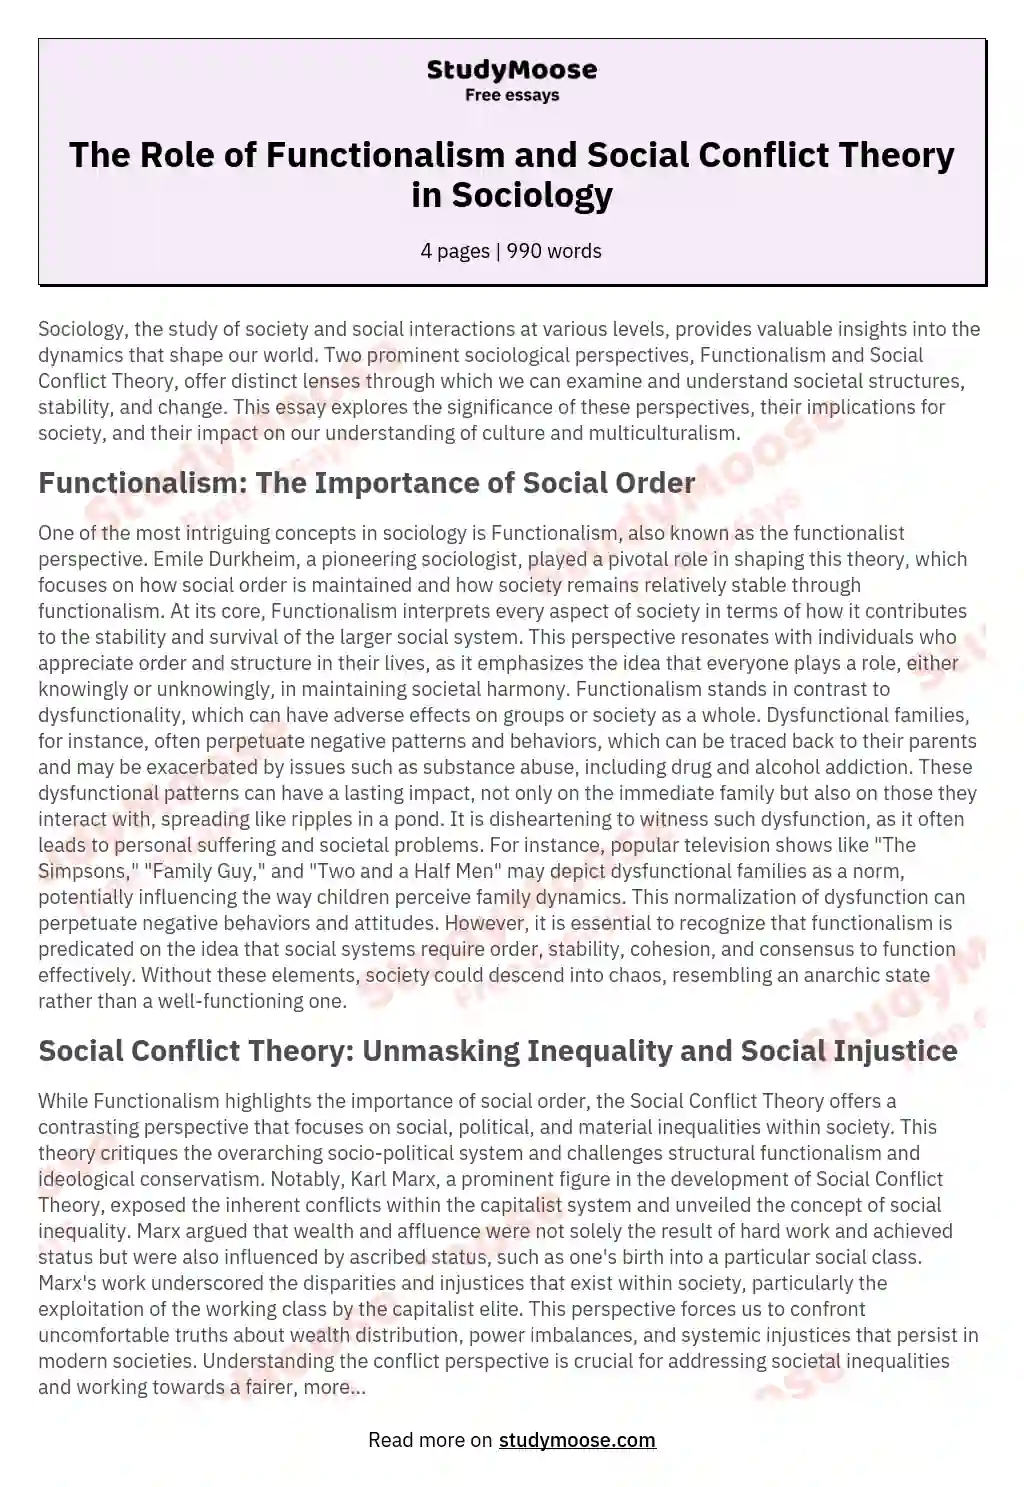 The Role of Functionalism and Social Conflict Theory in Sociology essay